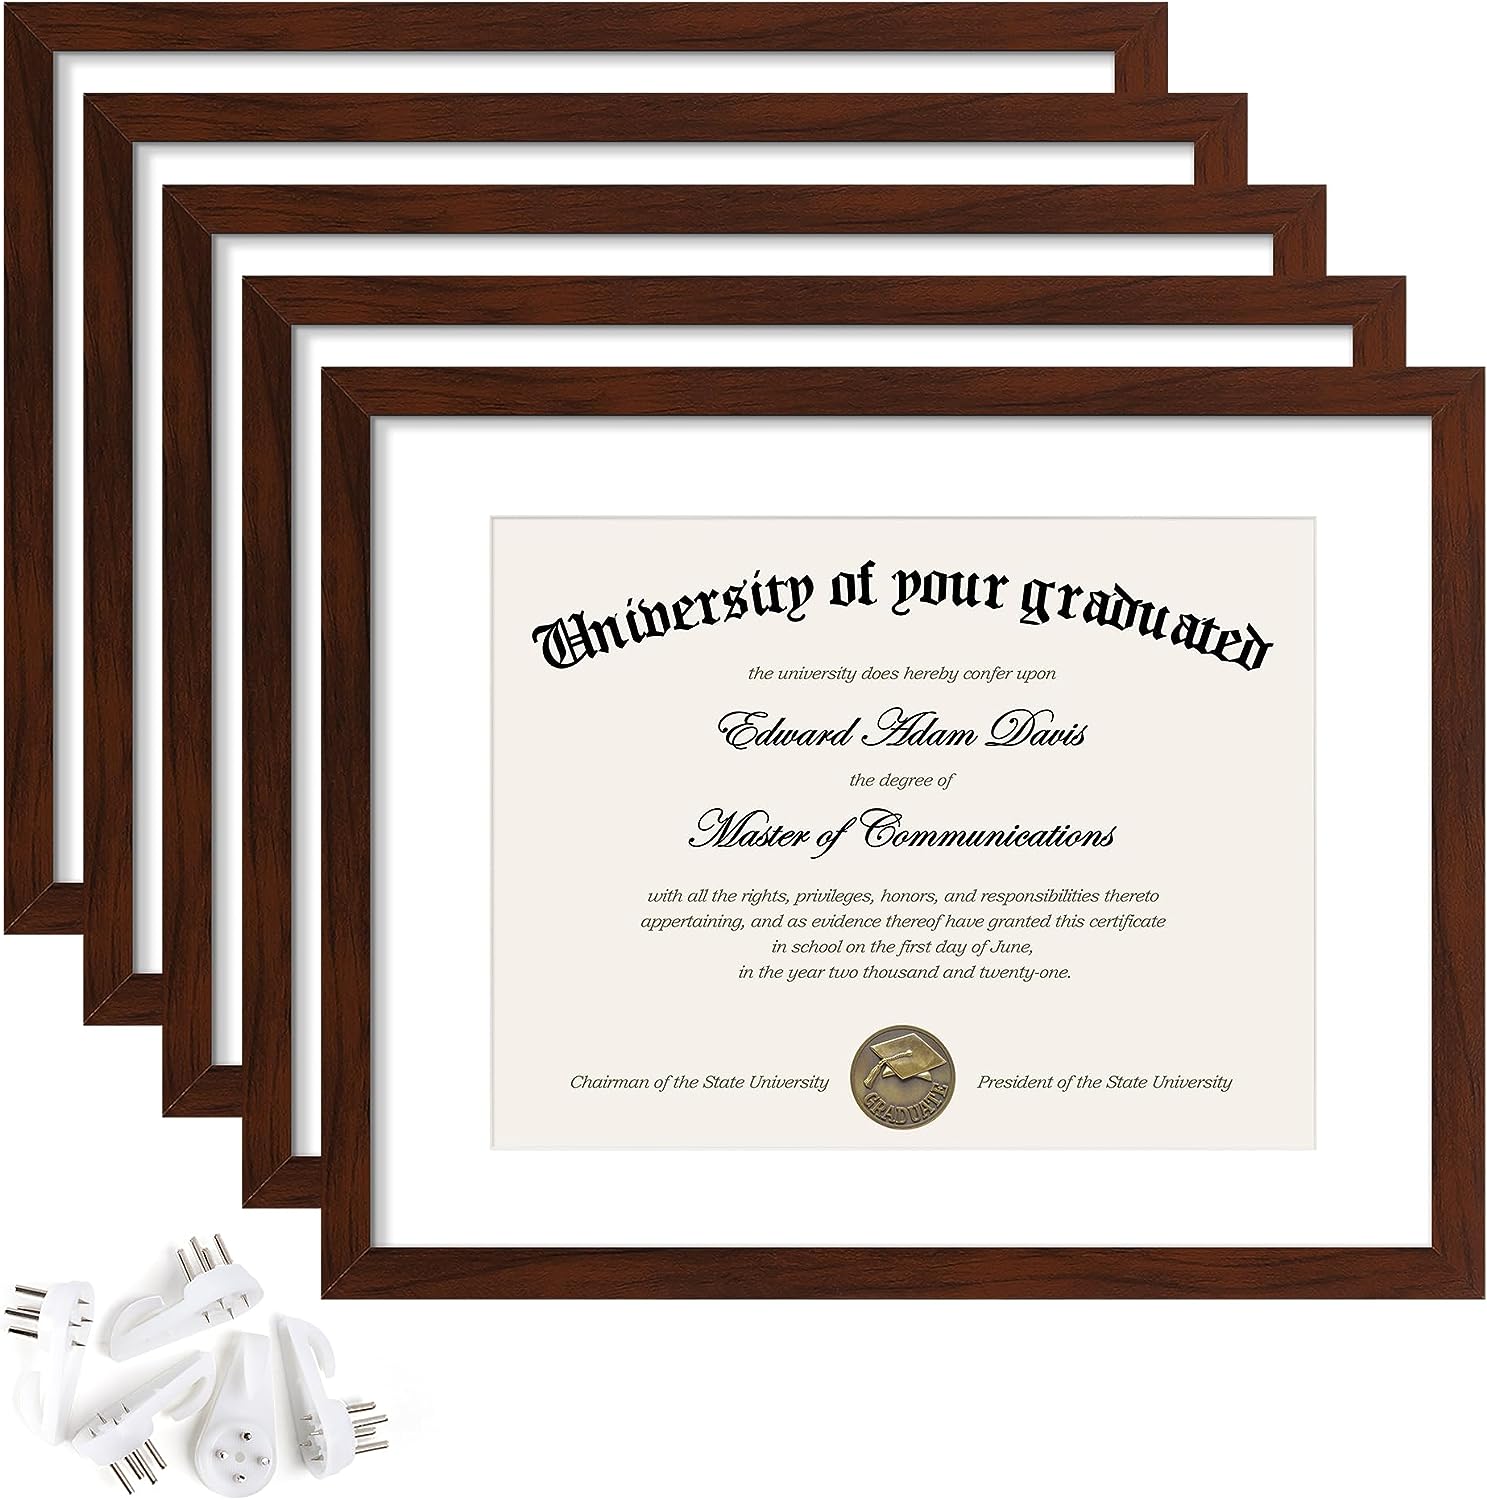 Picture Framing Mat 16x20 mat for 11x14 diploma or foto set of 6 same size